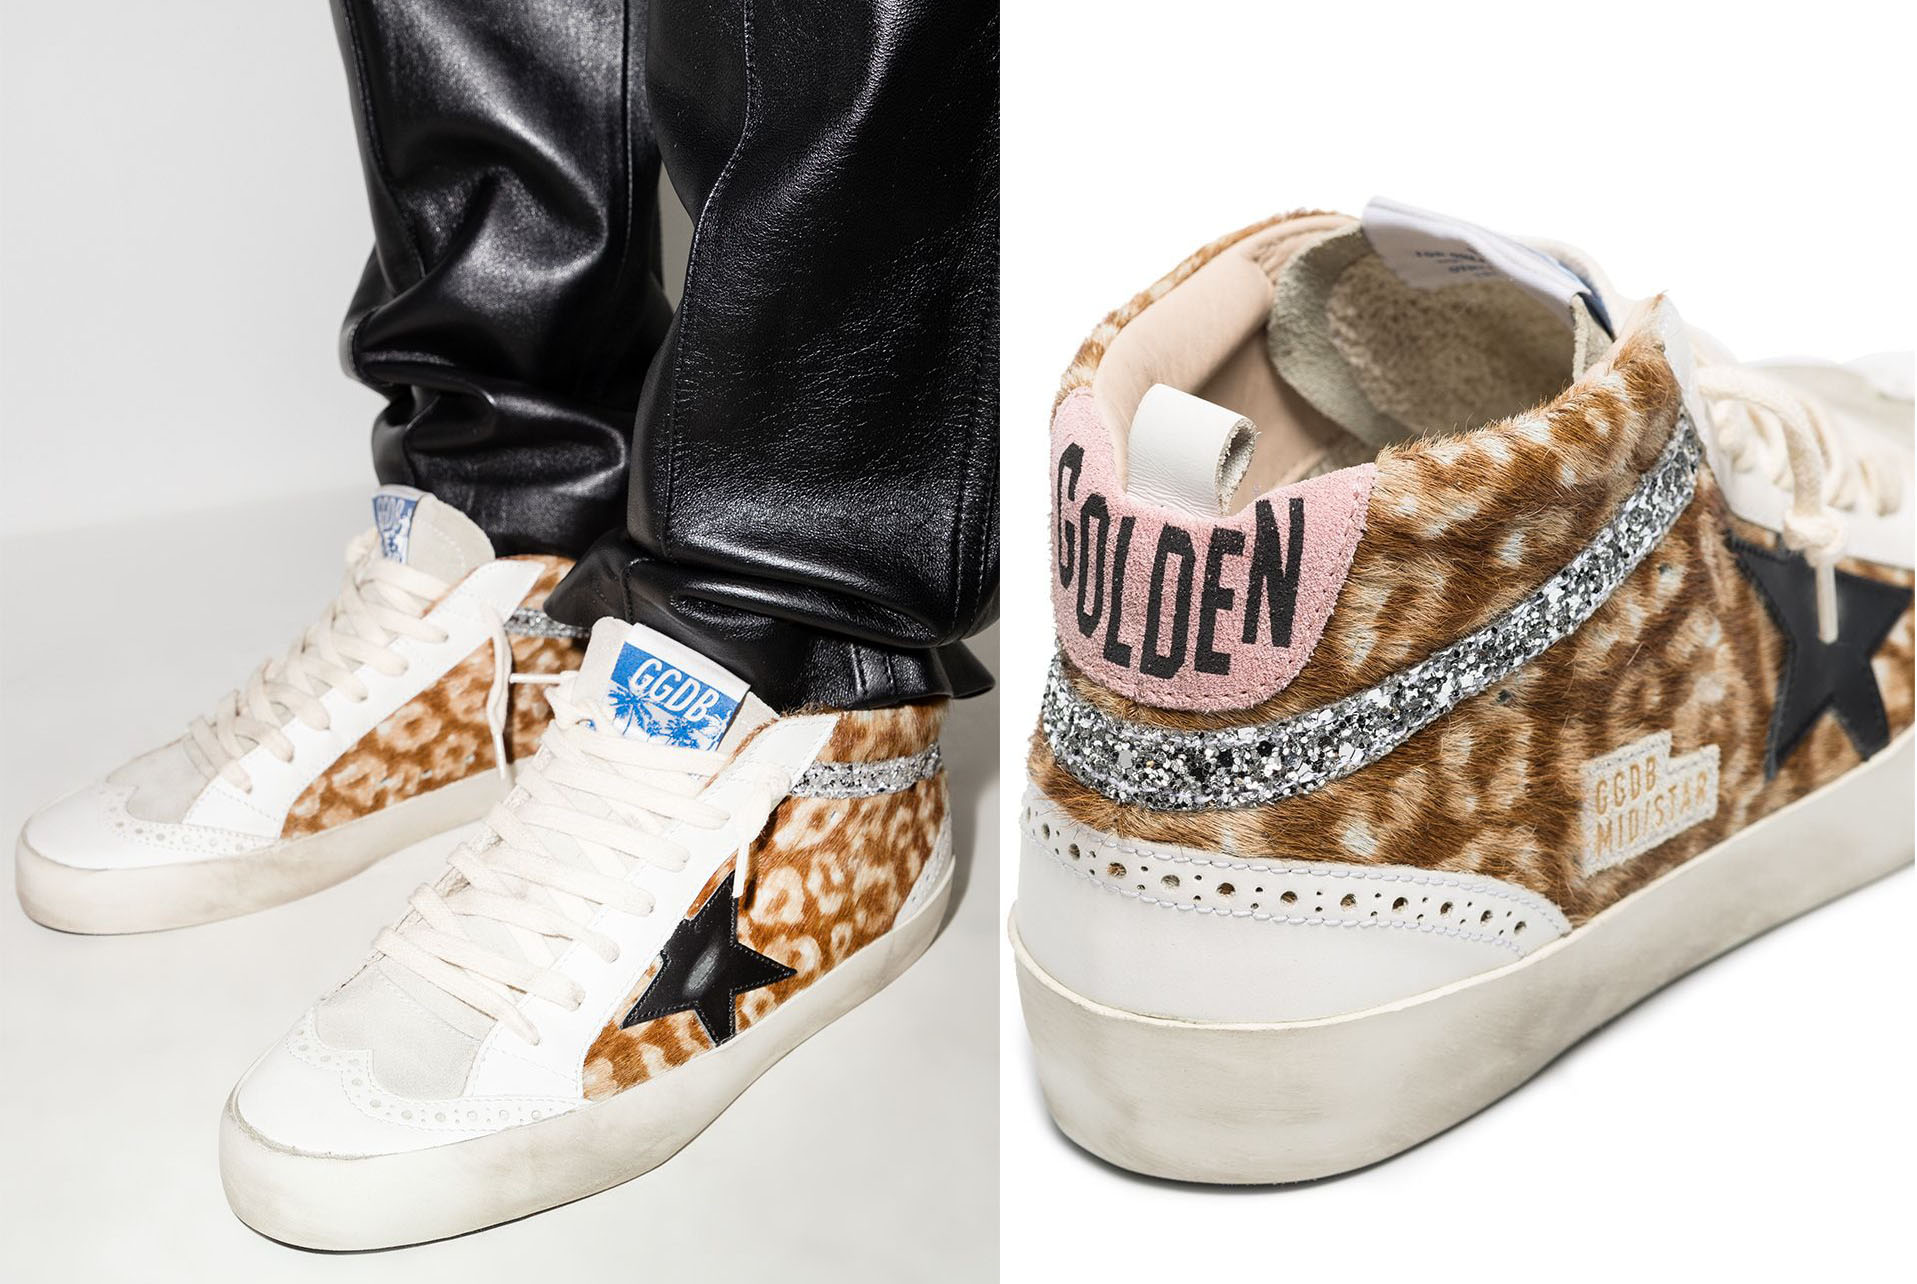 Inspired by 'perfect imperfections' alongside traditional craftsmanship, these multi-paneled Golden Goose sneakers feature the signature distressed-effect and star-patch detailing